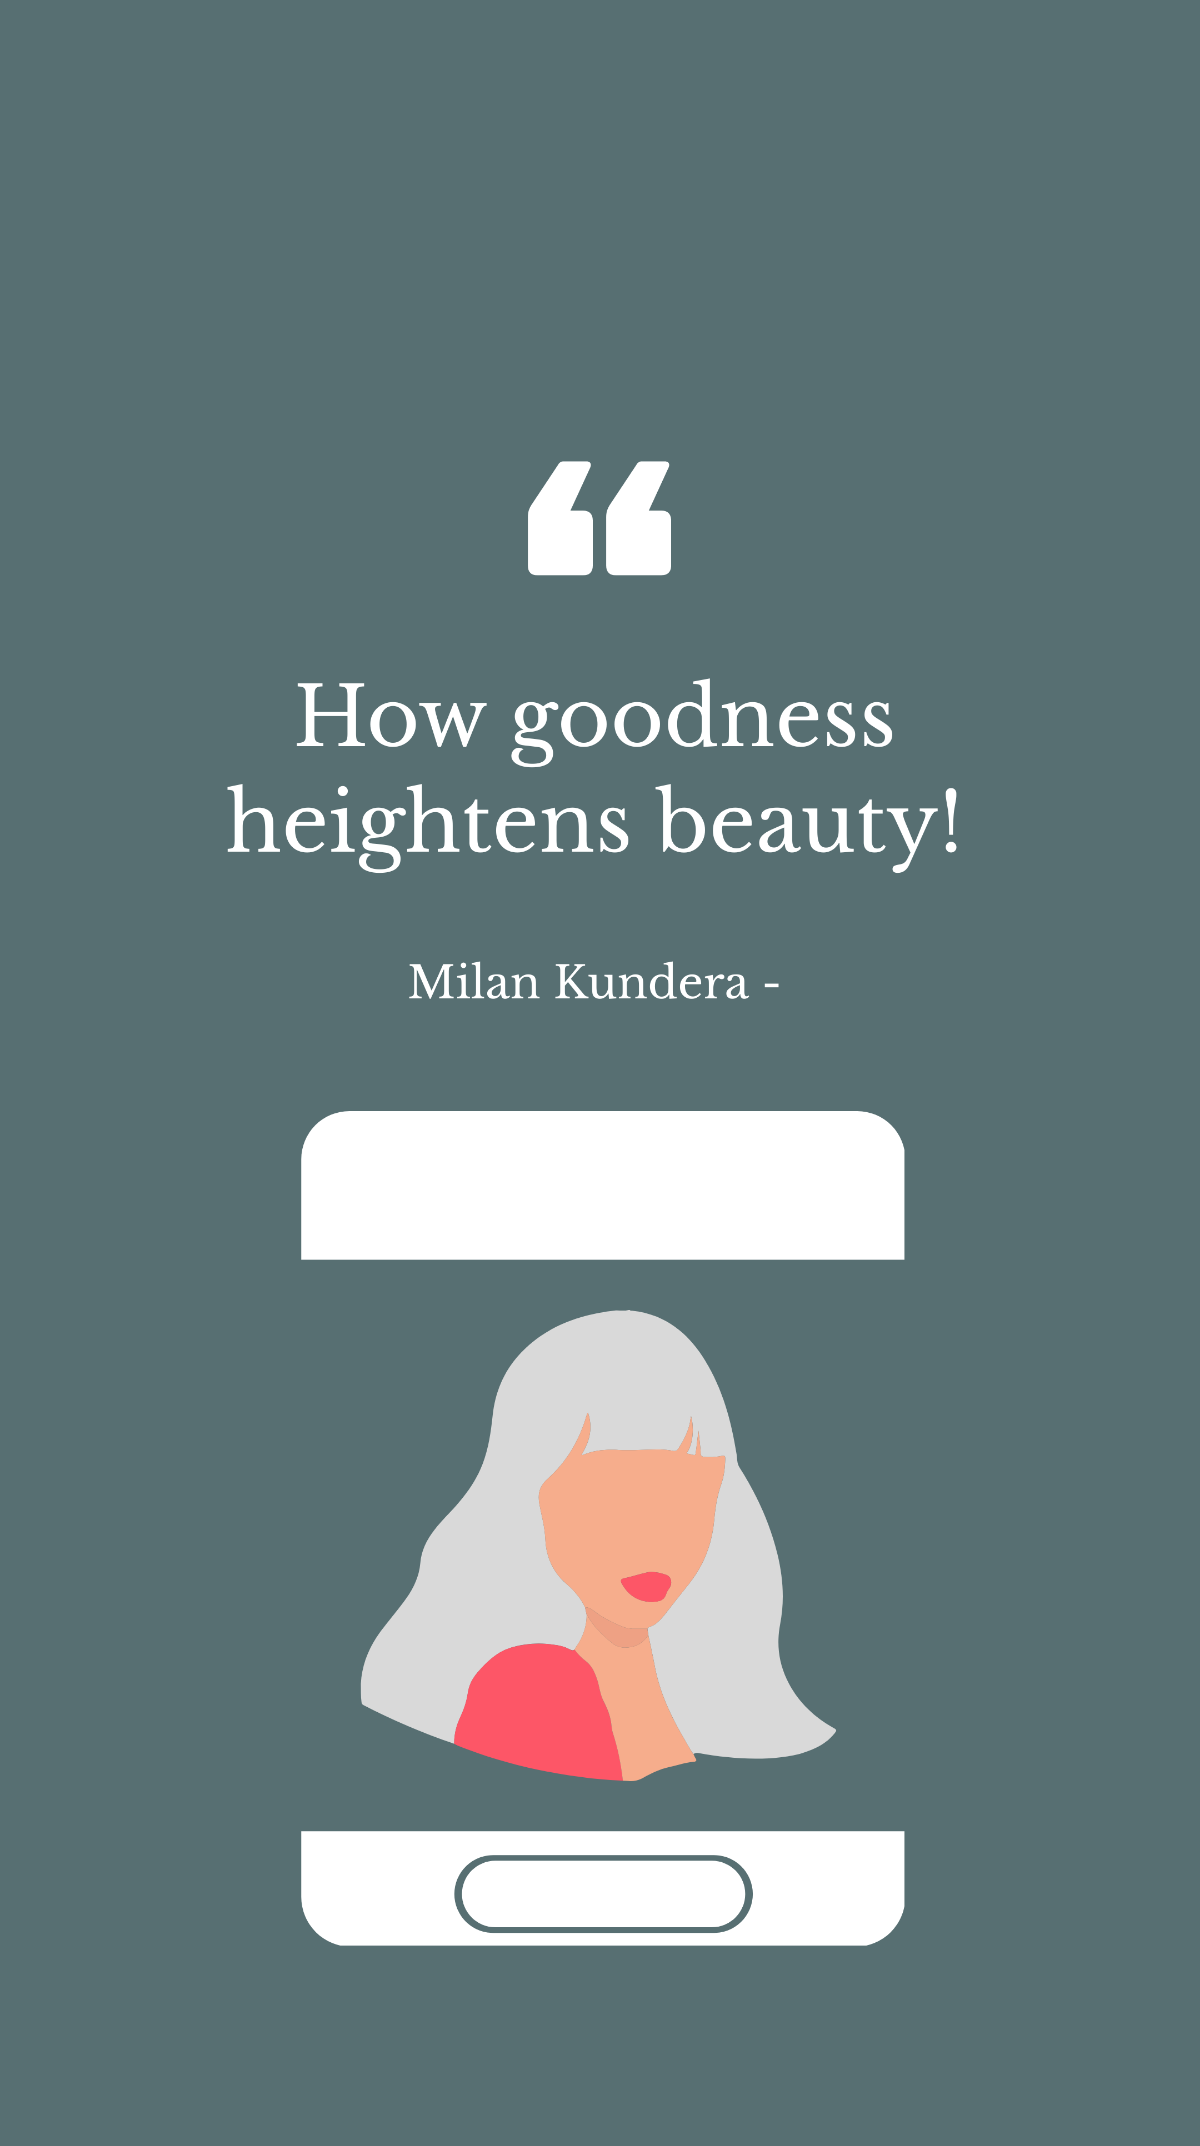 Free Milan Kundera - How goodness heightens beauty! Template